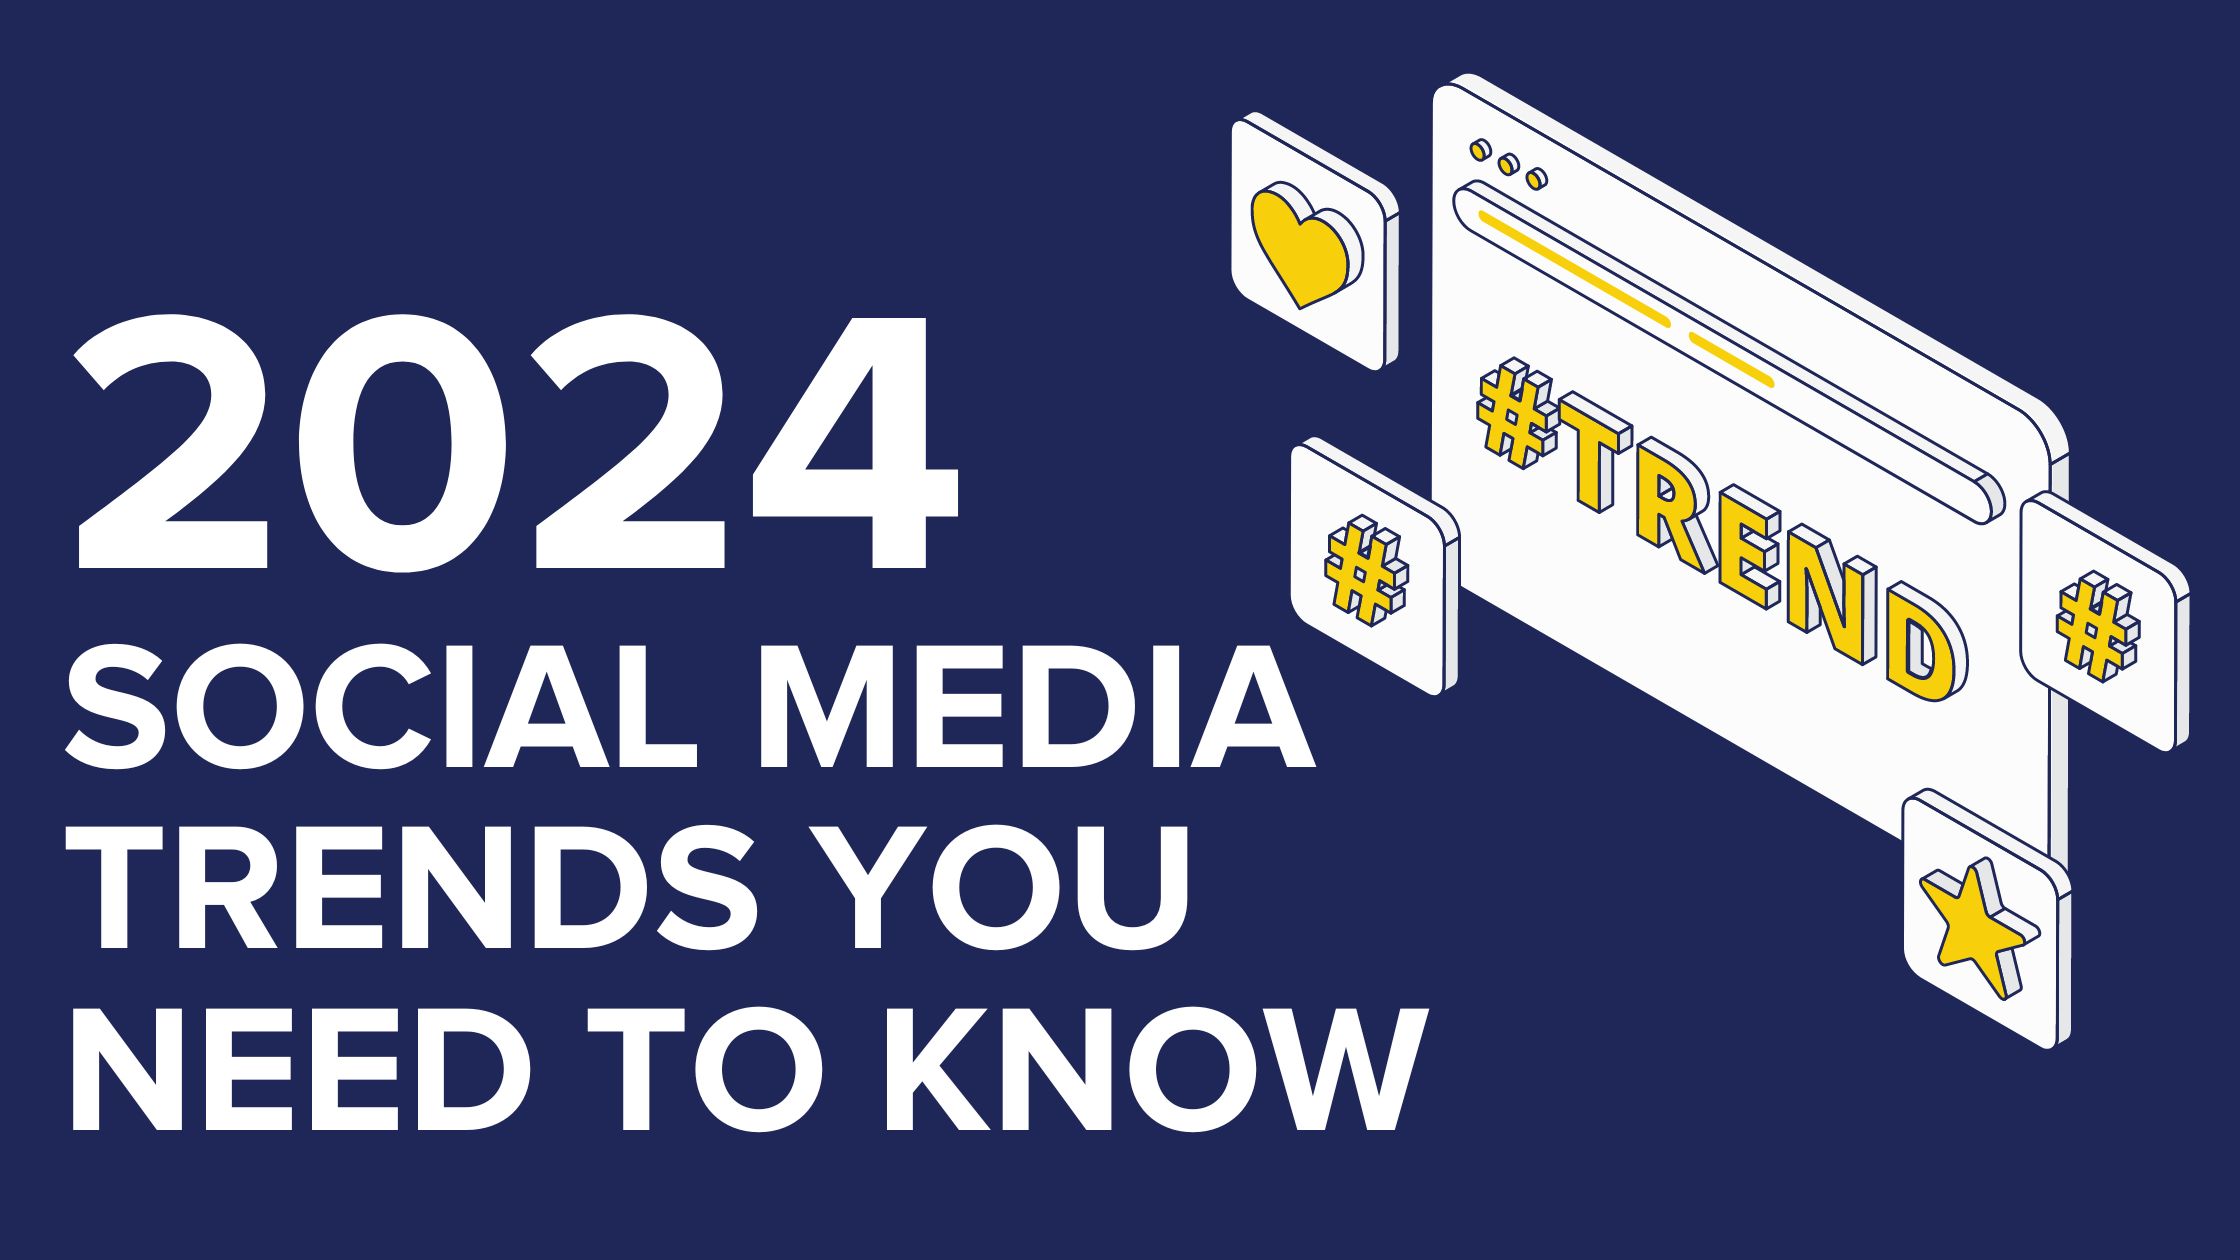 2024 Social Media Trends You Need to Know